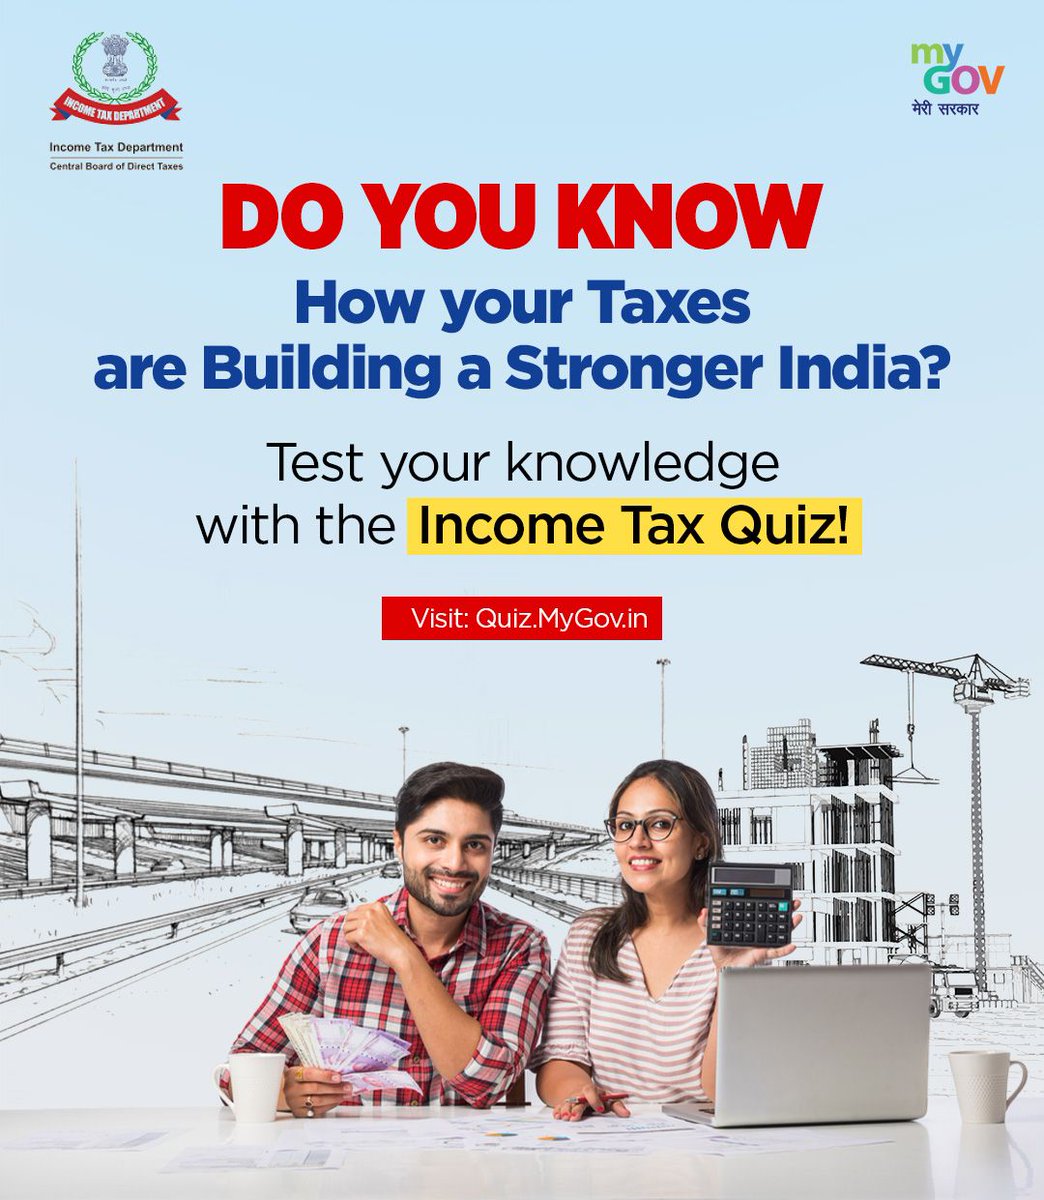 Ready to boost your tax IQ? Take the Income Tax Quiz on #MyGov and empower yourself with crucial tax knowledge. Visit: quiz.mygov.in/quiz/income-ta… #NewIndia #IT @IncomeTaxIndia